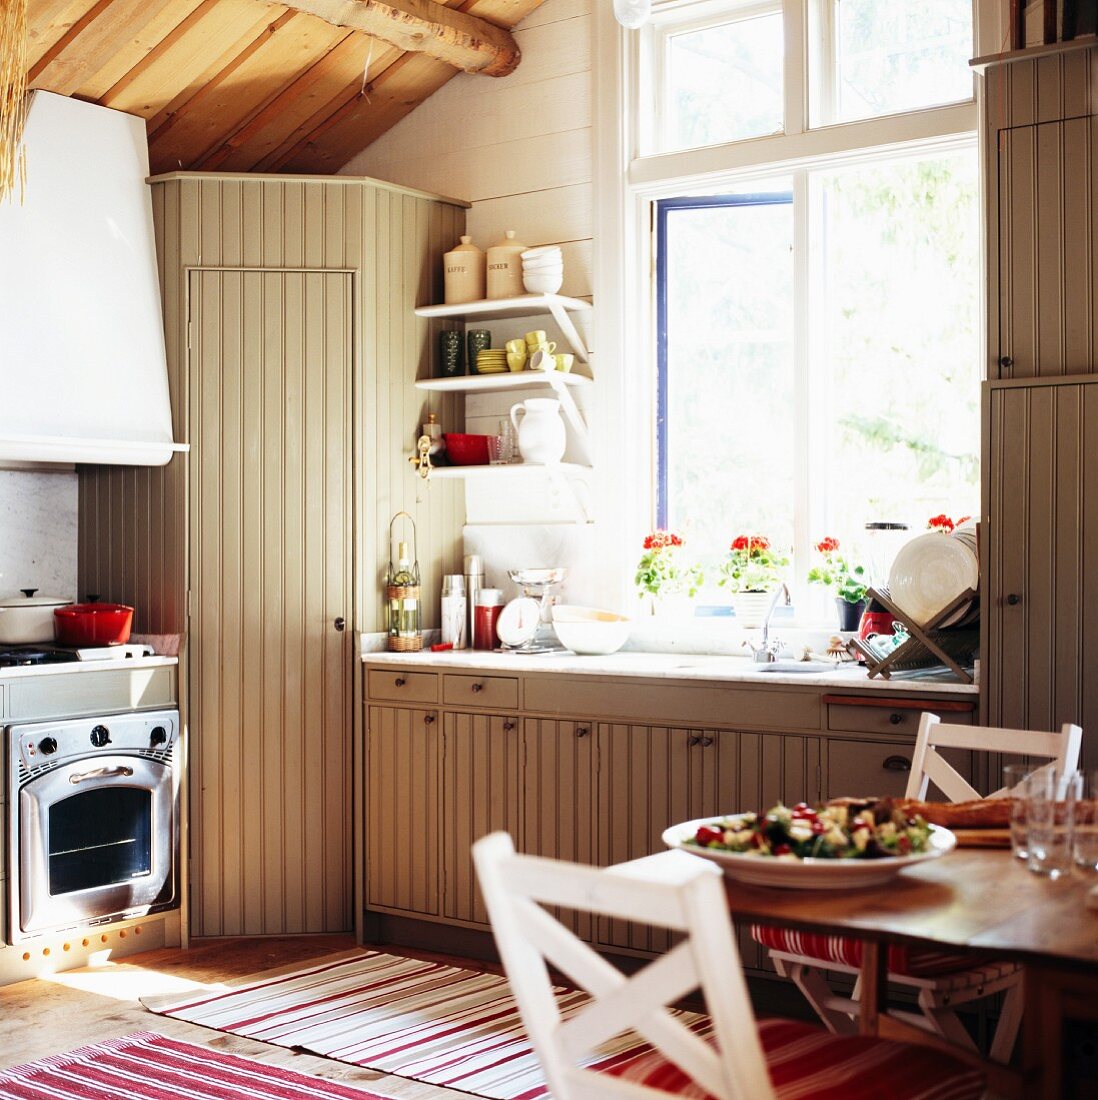 Interior from a rustic kitchen.